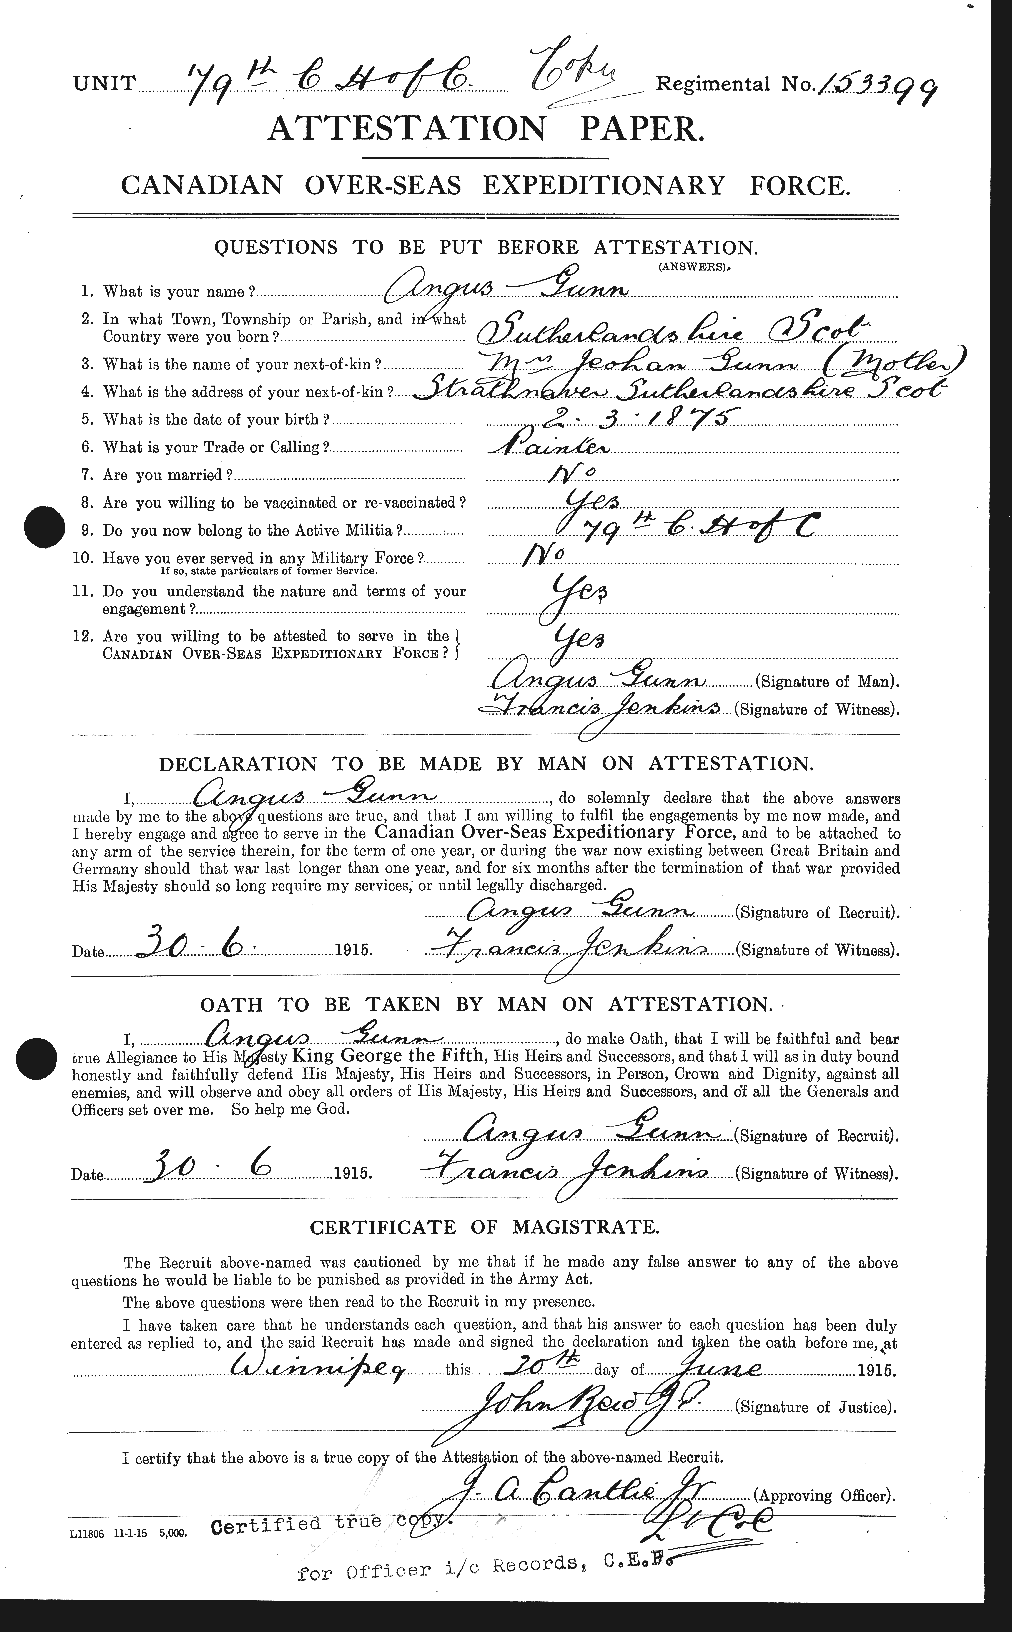 Personnel Records of the First World War - CEF 367997a